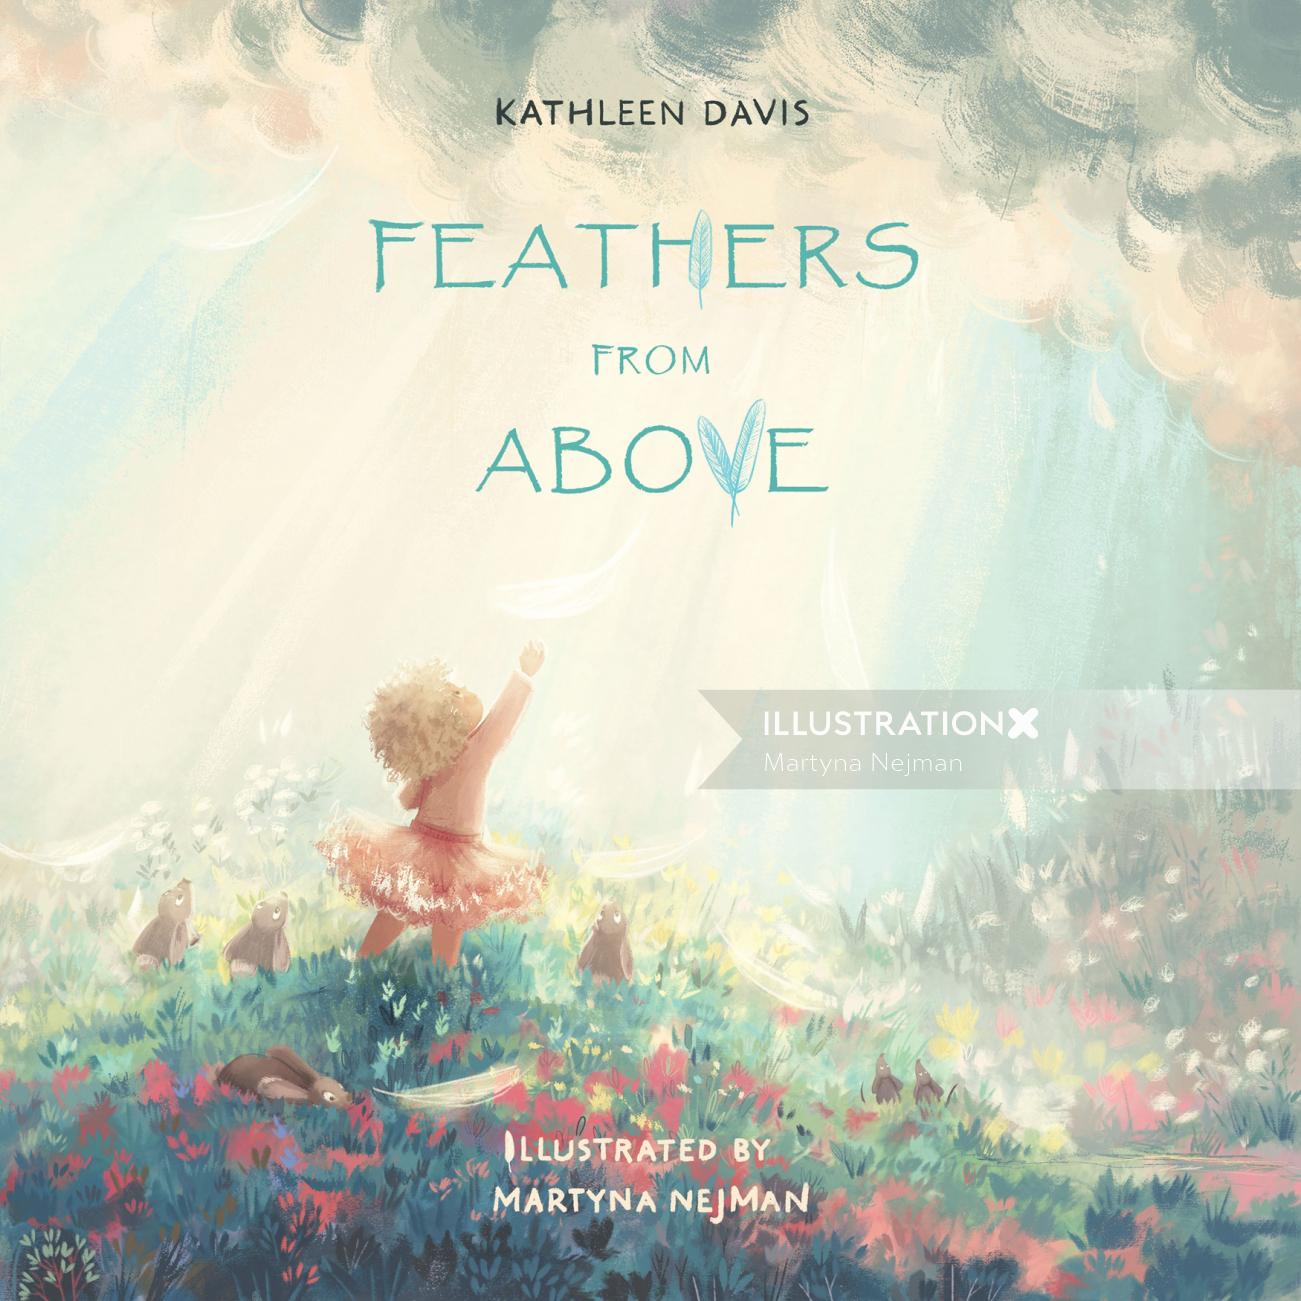 "Feathers from above" cover